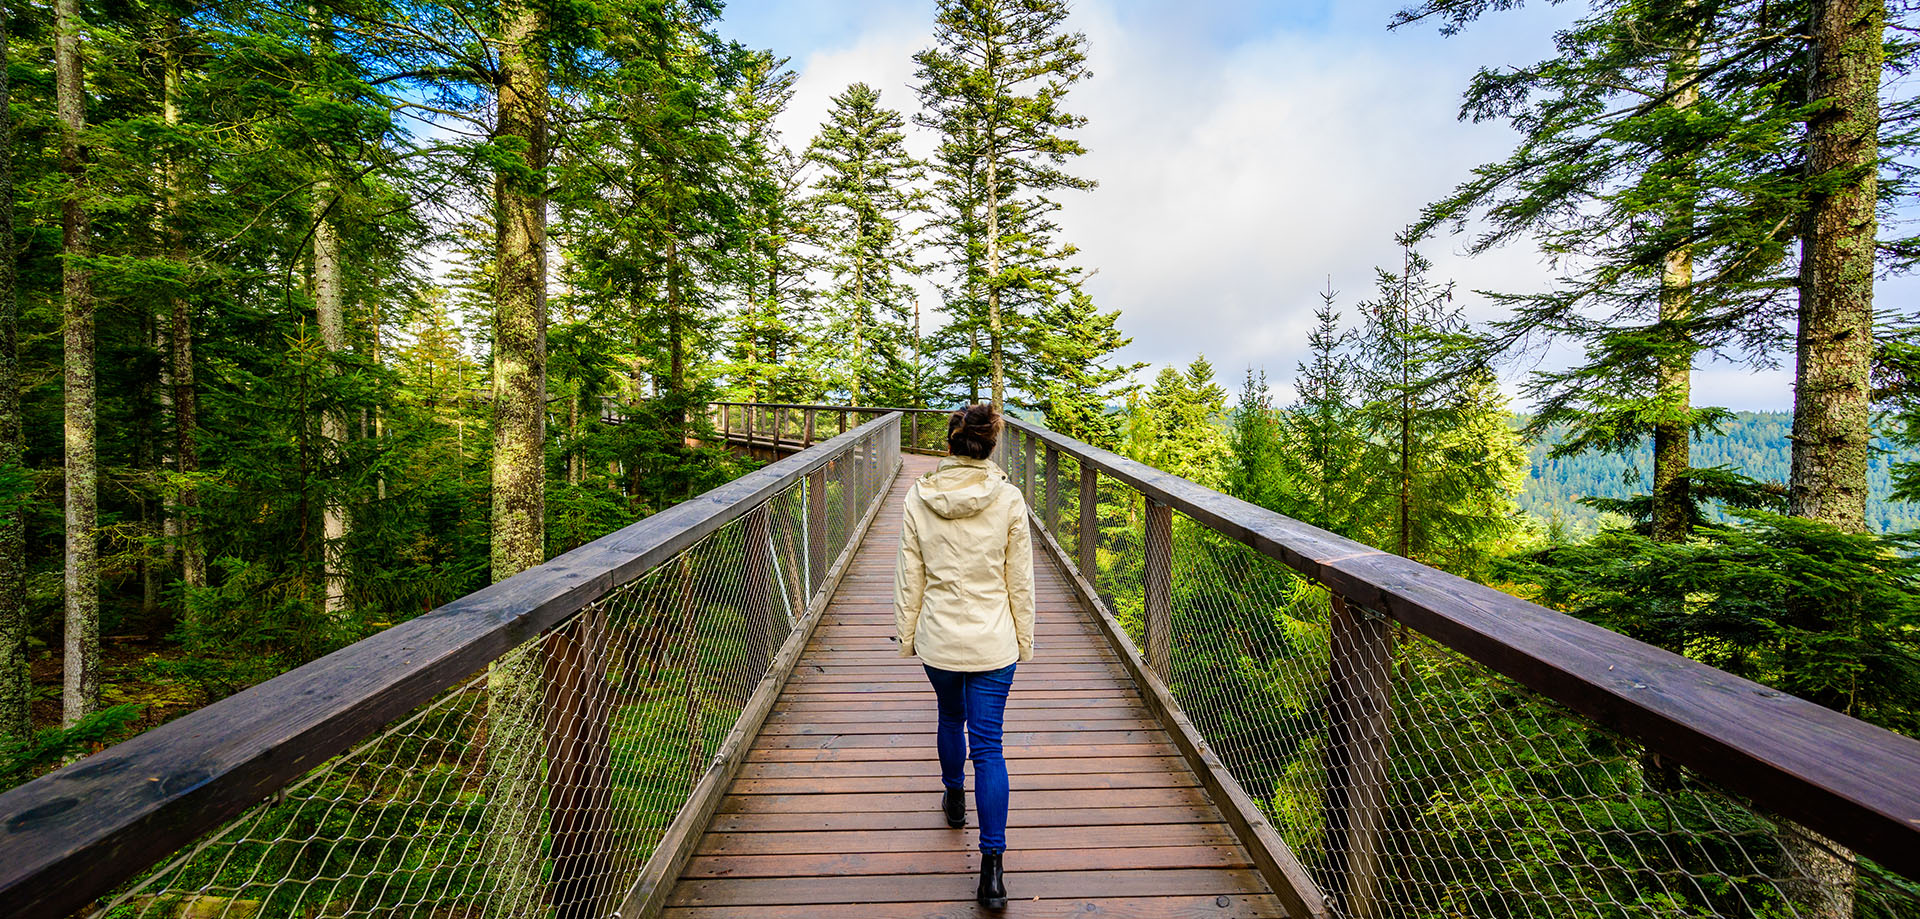 Image showing a woman walking on a bridge in a forest